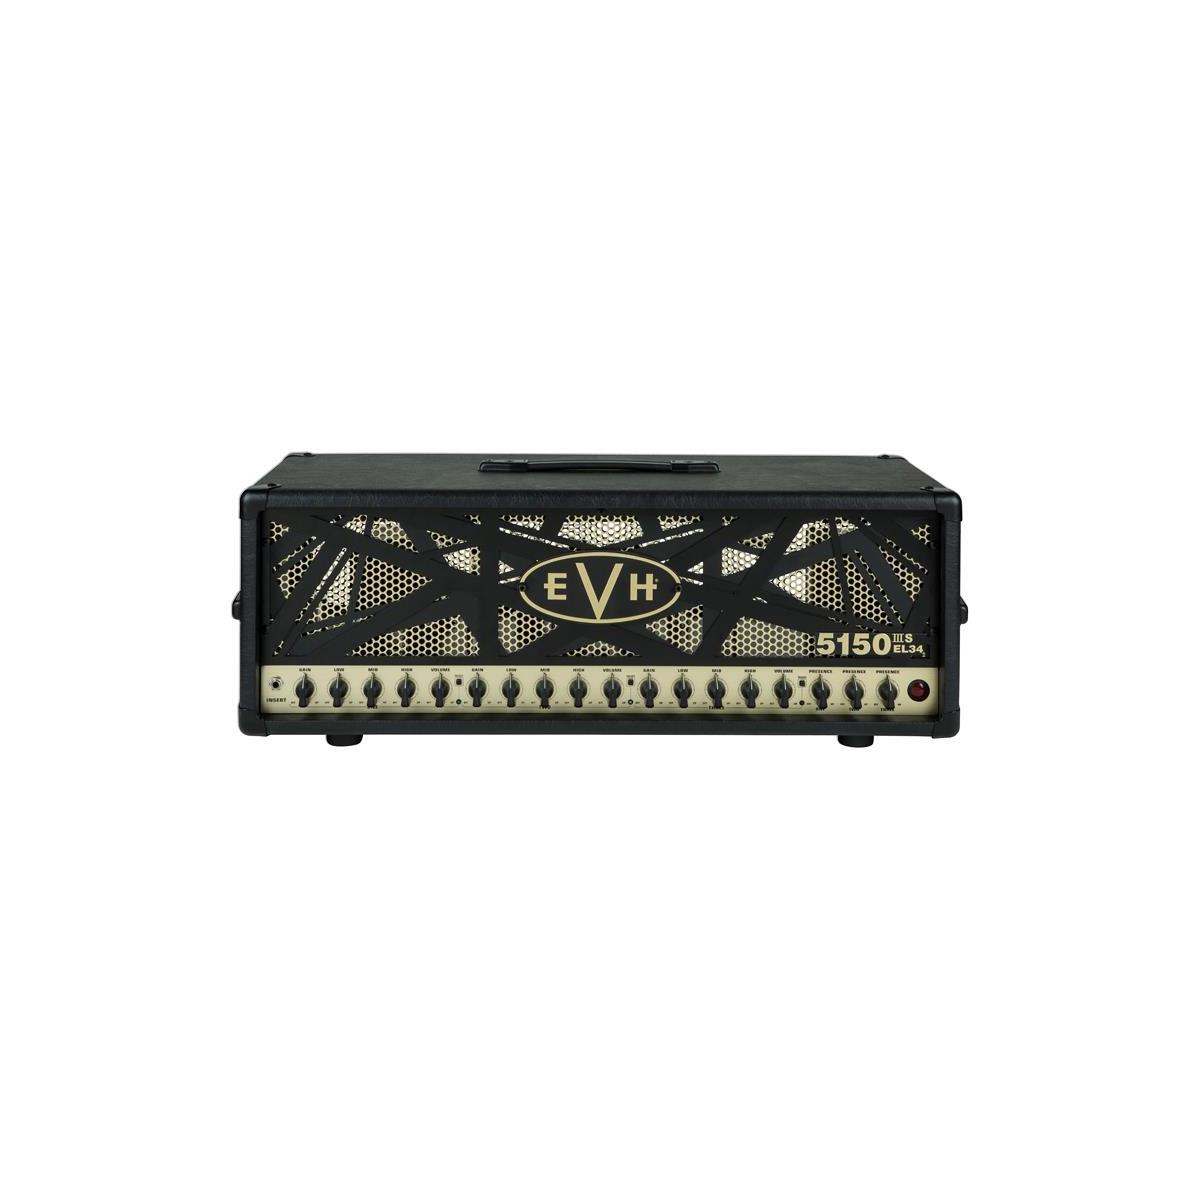 EVH 5150III 100S EL34 100W Head Amplifier with EL34 Tubes, 120V Introducing the 5150III 100S EL34 100W Head Amplifier with EL34 Tubes from Eddie Van Halen's brand, EVH. EVH 5150III heads and cabinets deliver the holy grail of tone - a truly clean channel, a super-heavy crunch channel and an off-the-scale overdrive channel you simply won't believe. You get the incredible tones Eddie Van Halen has chased his whole life, as Eddie himself has defined and designed each of the 5150III amplifier's three channels.  • Power: 100 Watts  • Tubes: Eight x JJ ECC83 (preamp); Four x EL34  • Three channels  • Controls: Gain, Low, Mid, High, Volume, Channel Select, Presence and Resonance for Each Channel  • Covering: Black Textured vinyl covering  • Four-button footswitch included